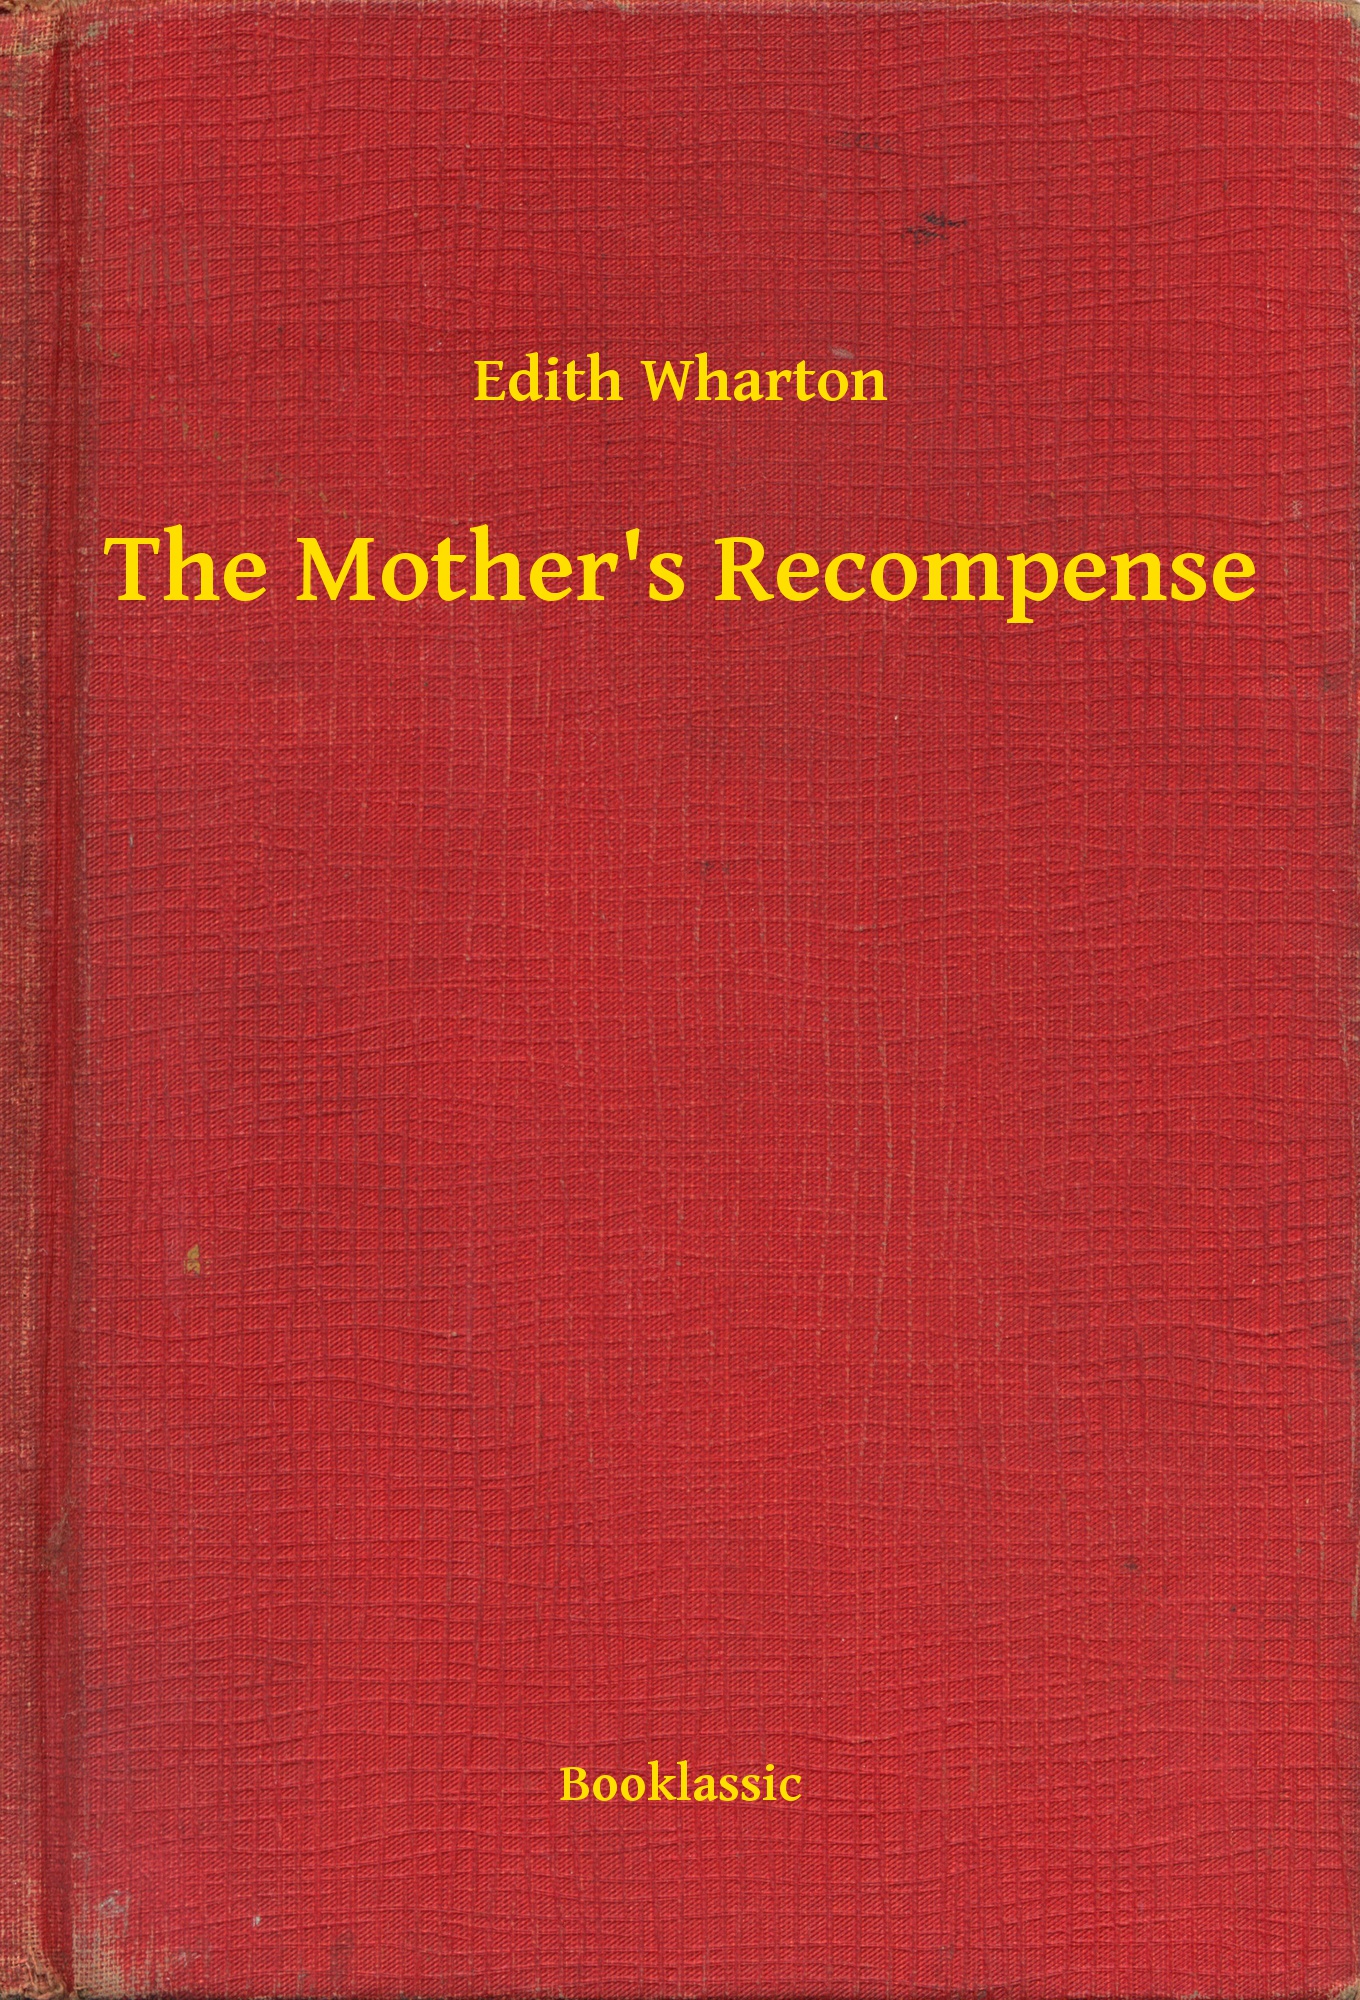 The Mother"s Recompense